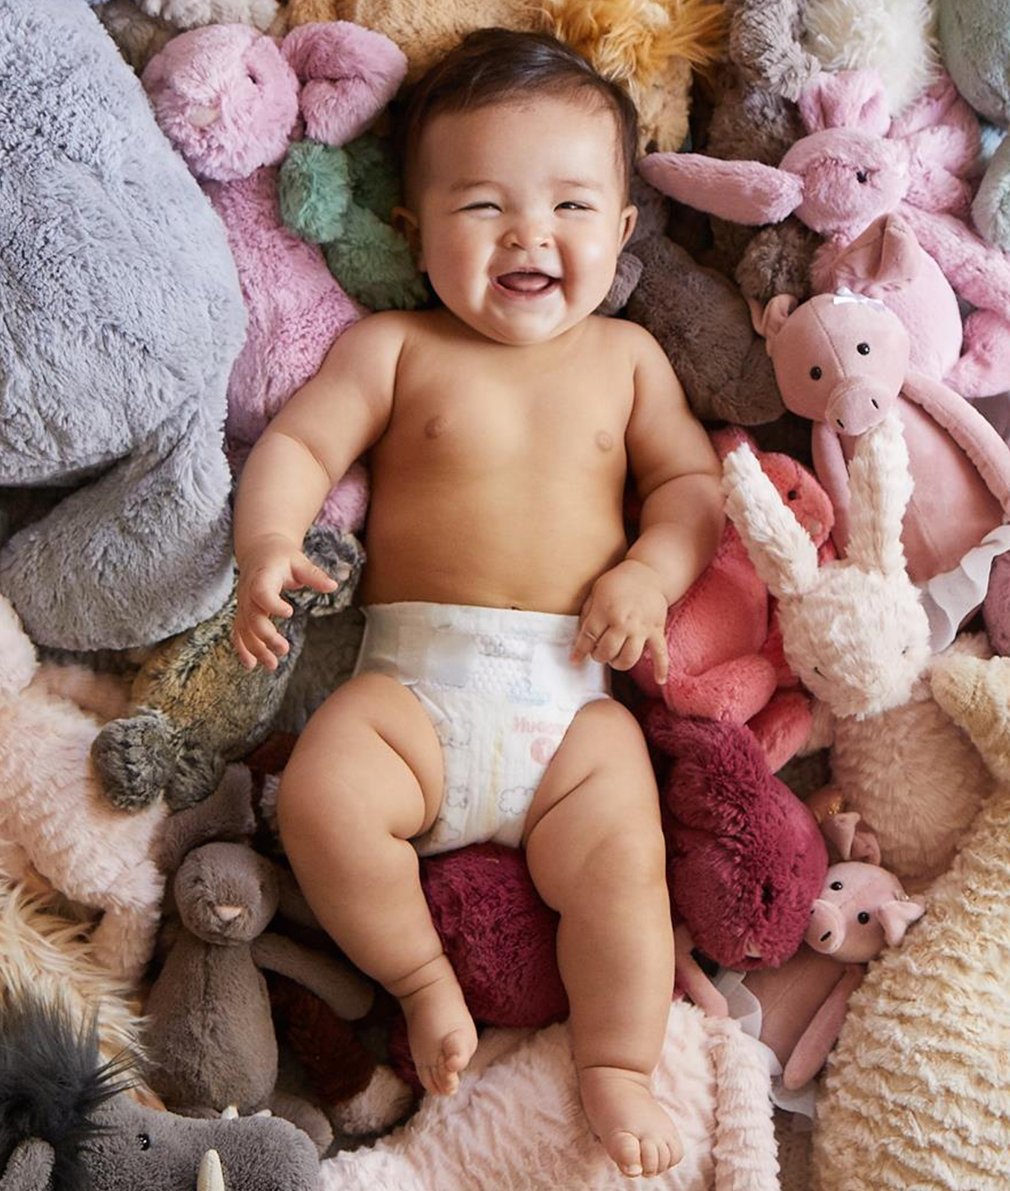 A laughing baby laying on a pile of stuffed animals